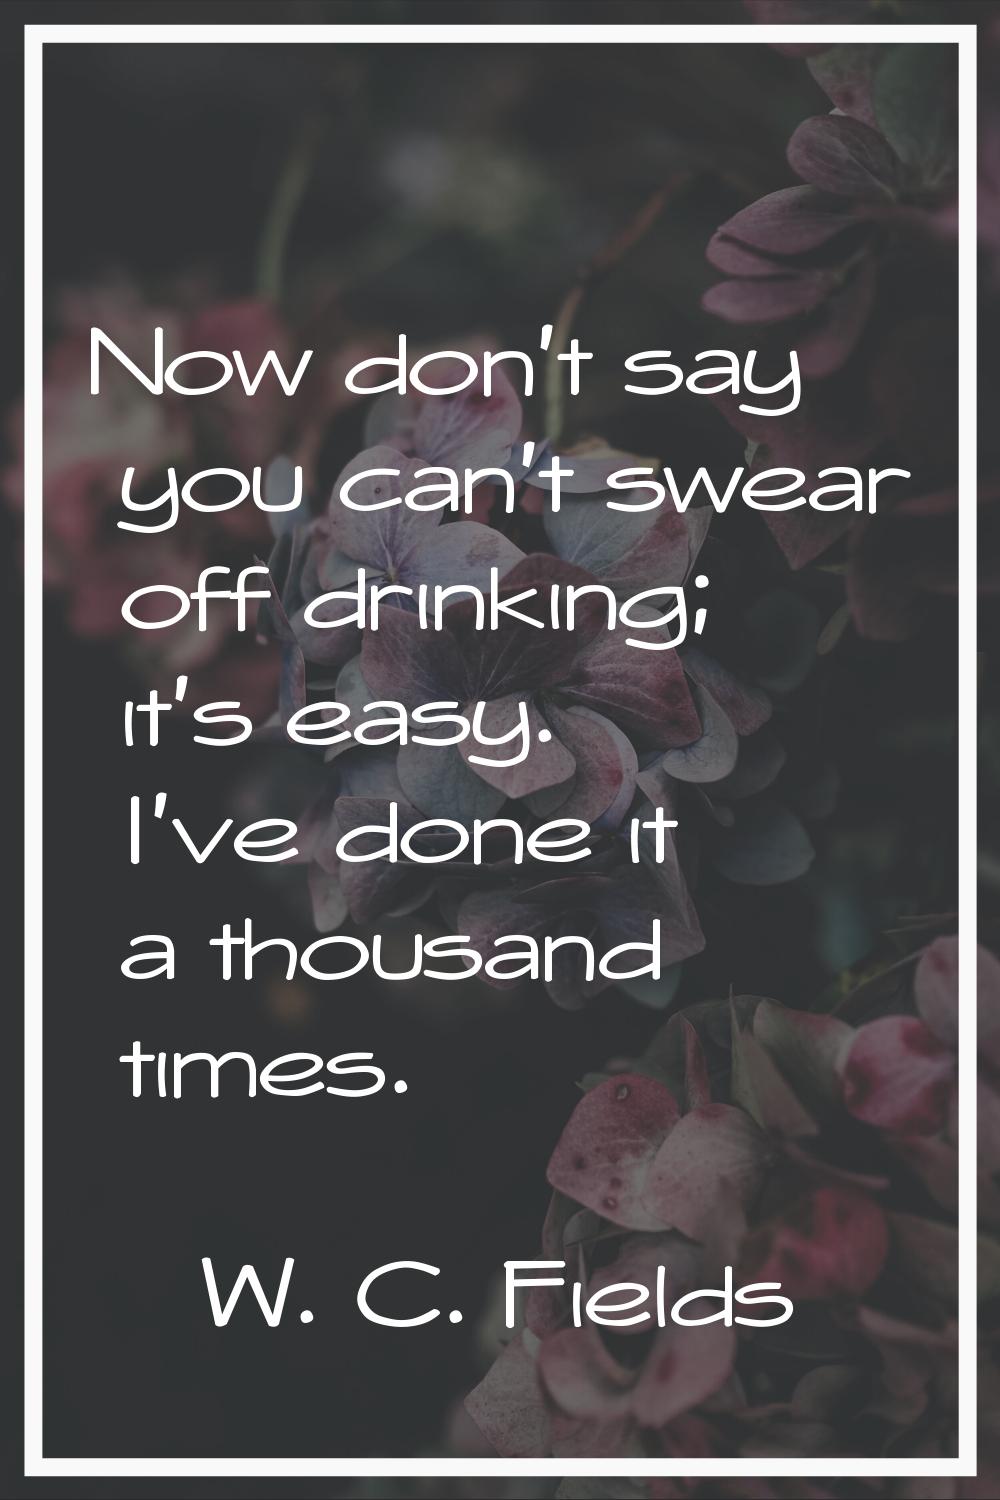 Now don't say you can't swear off drinking; it's easy. I've done it a thousand times.